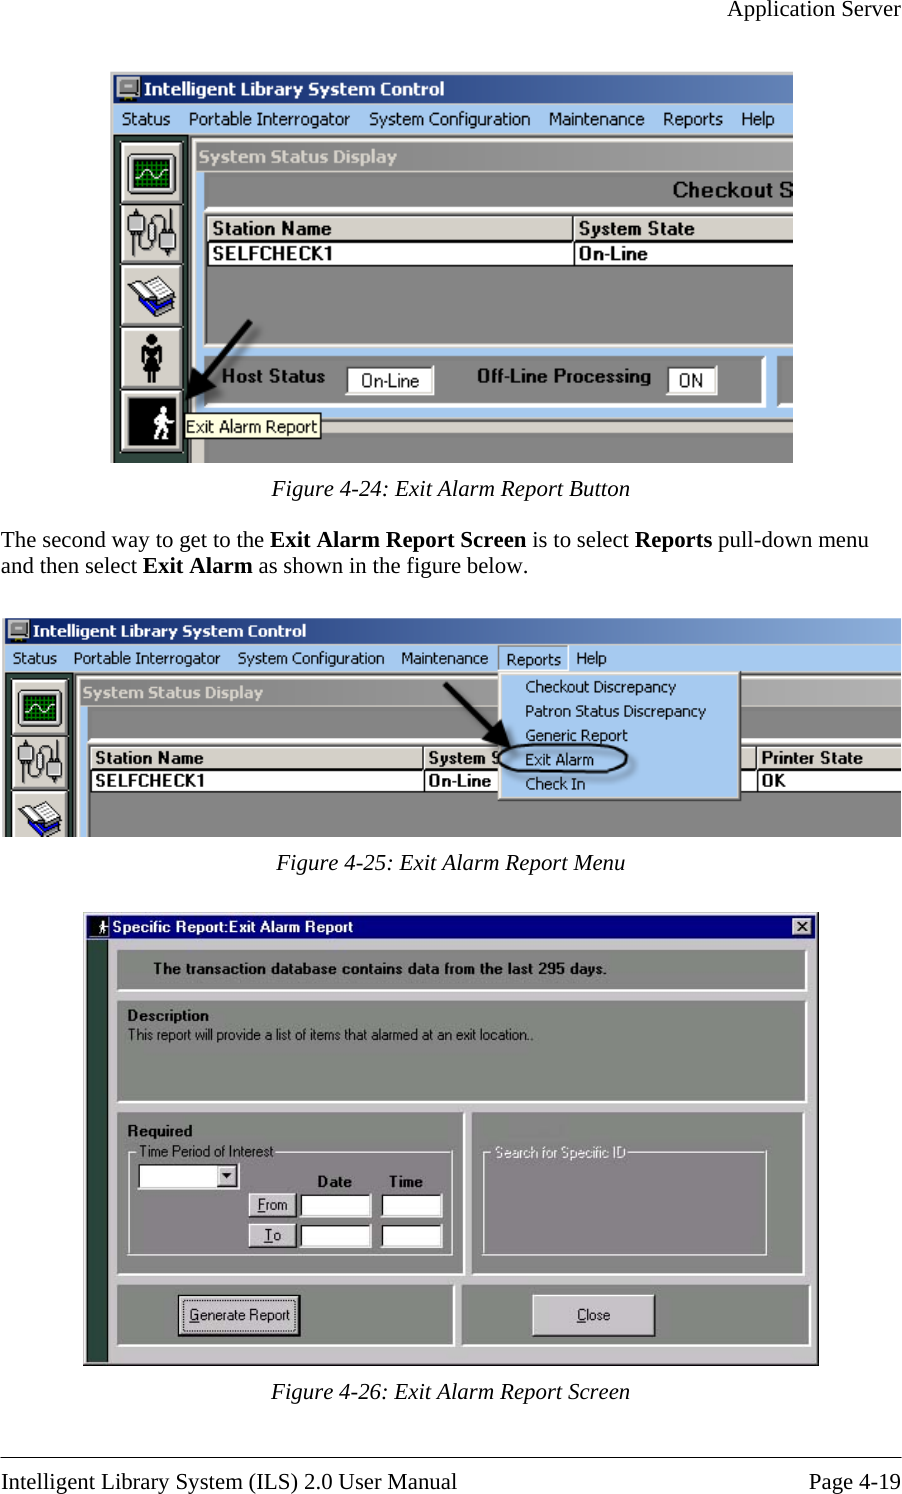   Application Server   Figure 4-24: Exit Alarm Report Button The second way to get to the Exit Alarm Report Screen is to selow.  elect Reports pull-down menu nd then select Exit Alarm as shown in the figure ba  Figure 4-25: Exit Alarm Report Menu  Figure 4-26: Exit Alarm Report Screen  Intelligent Library System (ILS) 2.0 User Manual  Page 4-19 